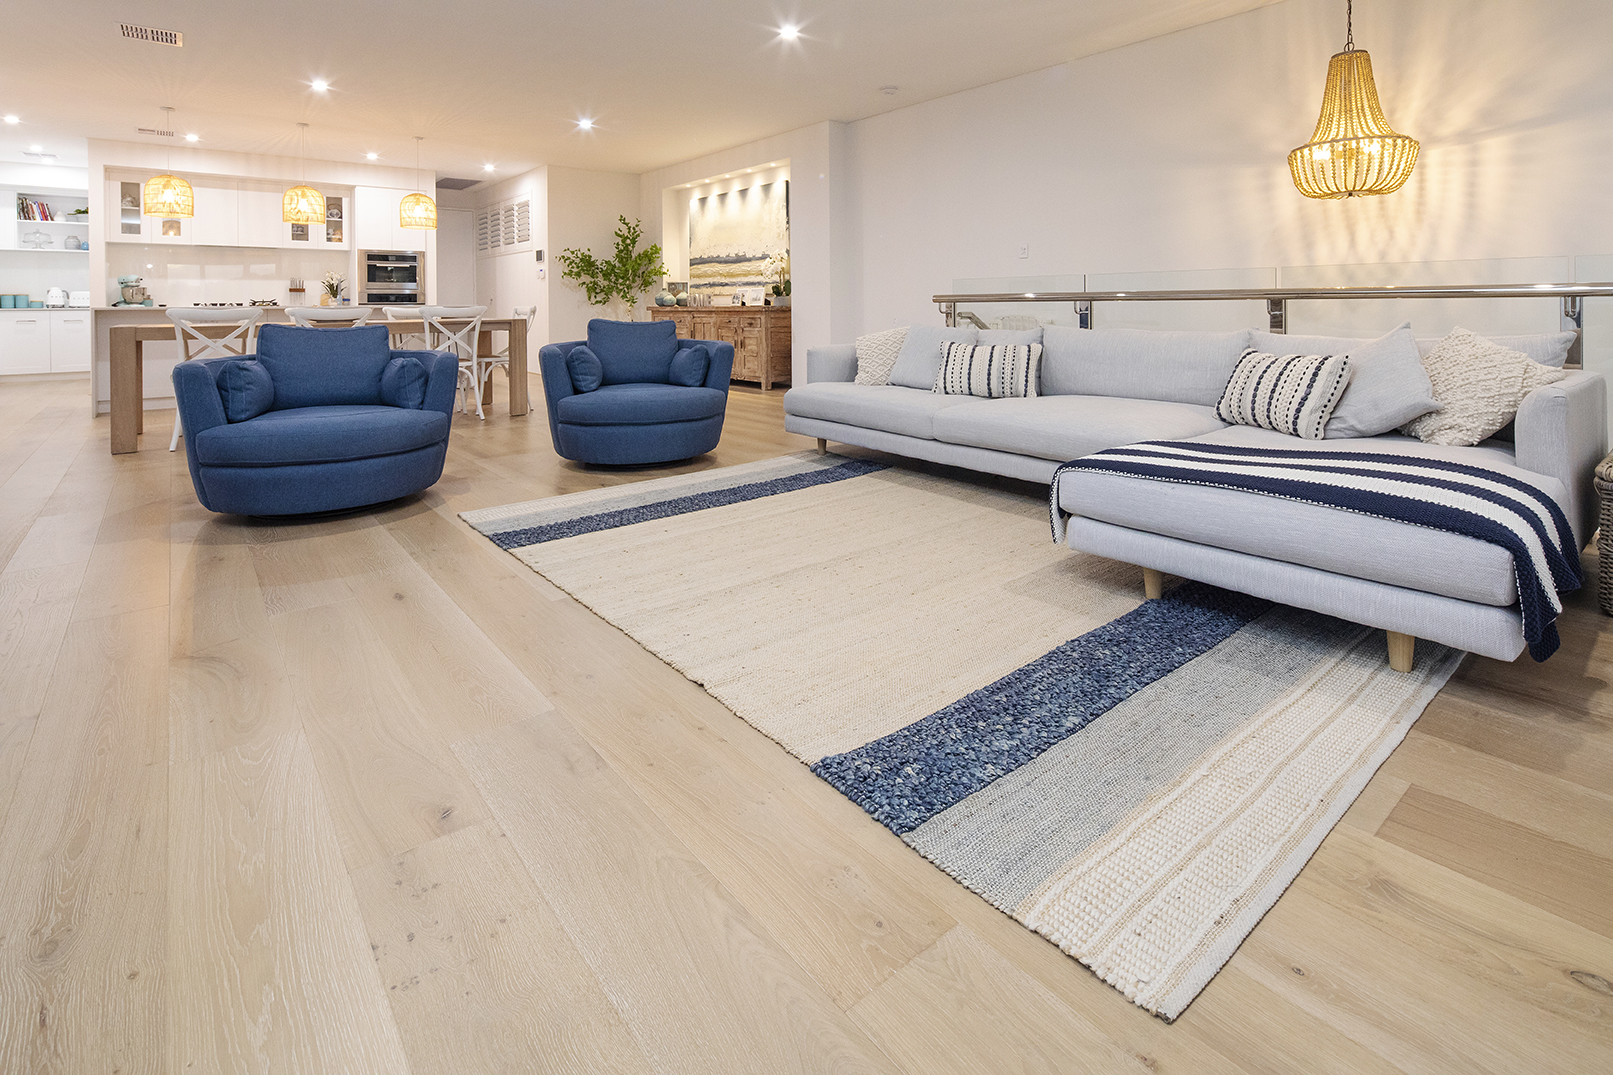 Coogee Homes with Lifewood Oak Flooring